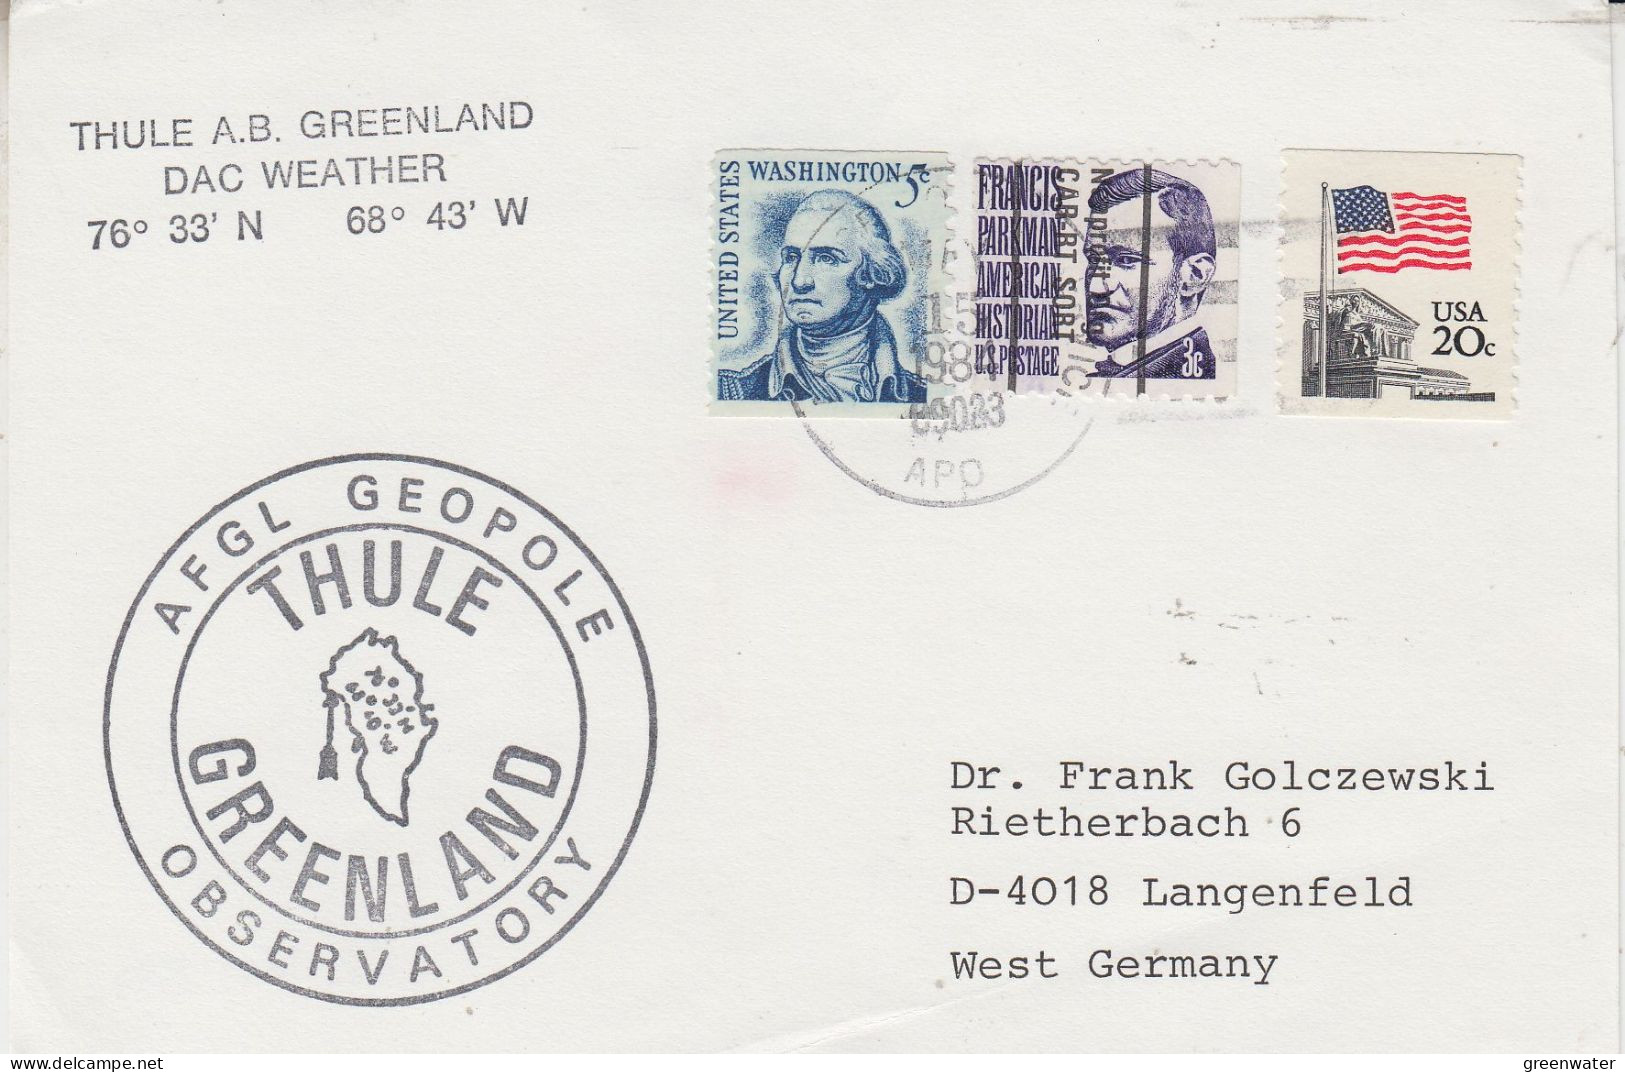 USA AFGL Geopole Observatory Thule Greenland Ca MAY 15 1984 (SD200) - Forschungsprogramme